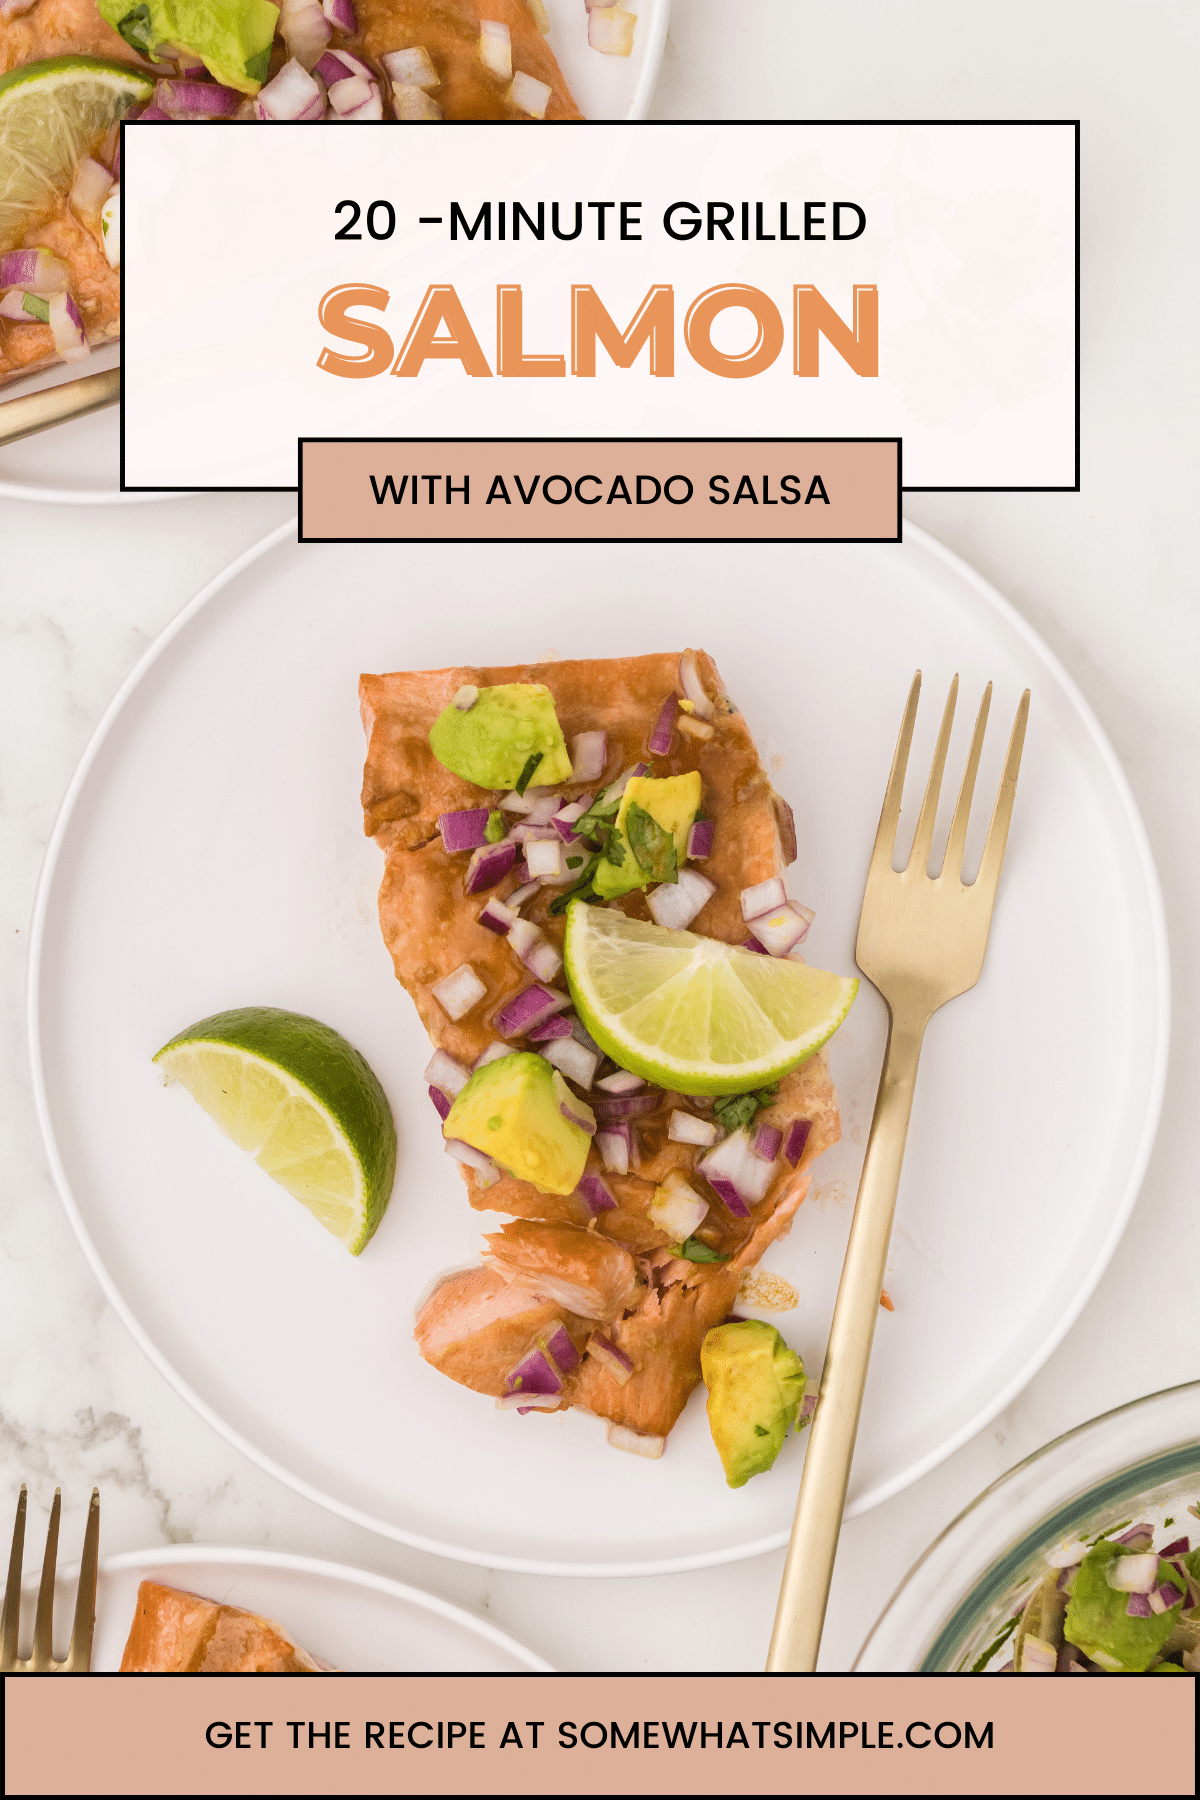 This recipe for grilled salmon with avocado salsa is a healthy, low-carb, simple meal idea that is easy to make in under 30 minutes! Tender flaky grilled salmon paired with a refreshing zesty avocado salsa makes for a delightful and impressive dinner for busy weeknights and special occasions! via @somewhatsimple